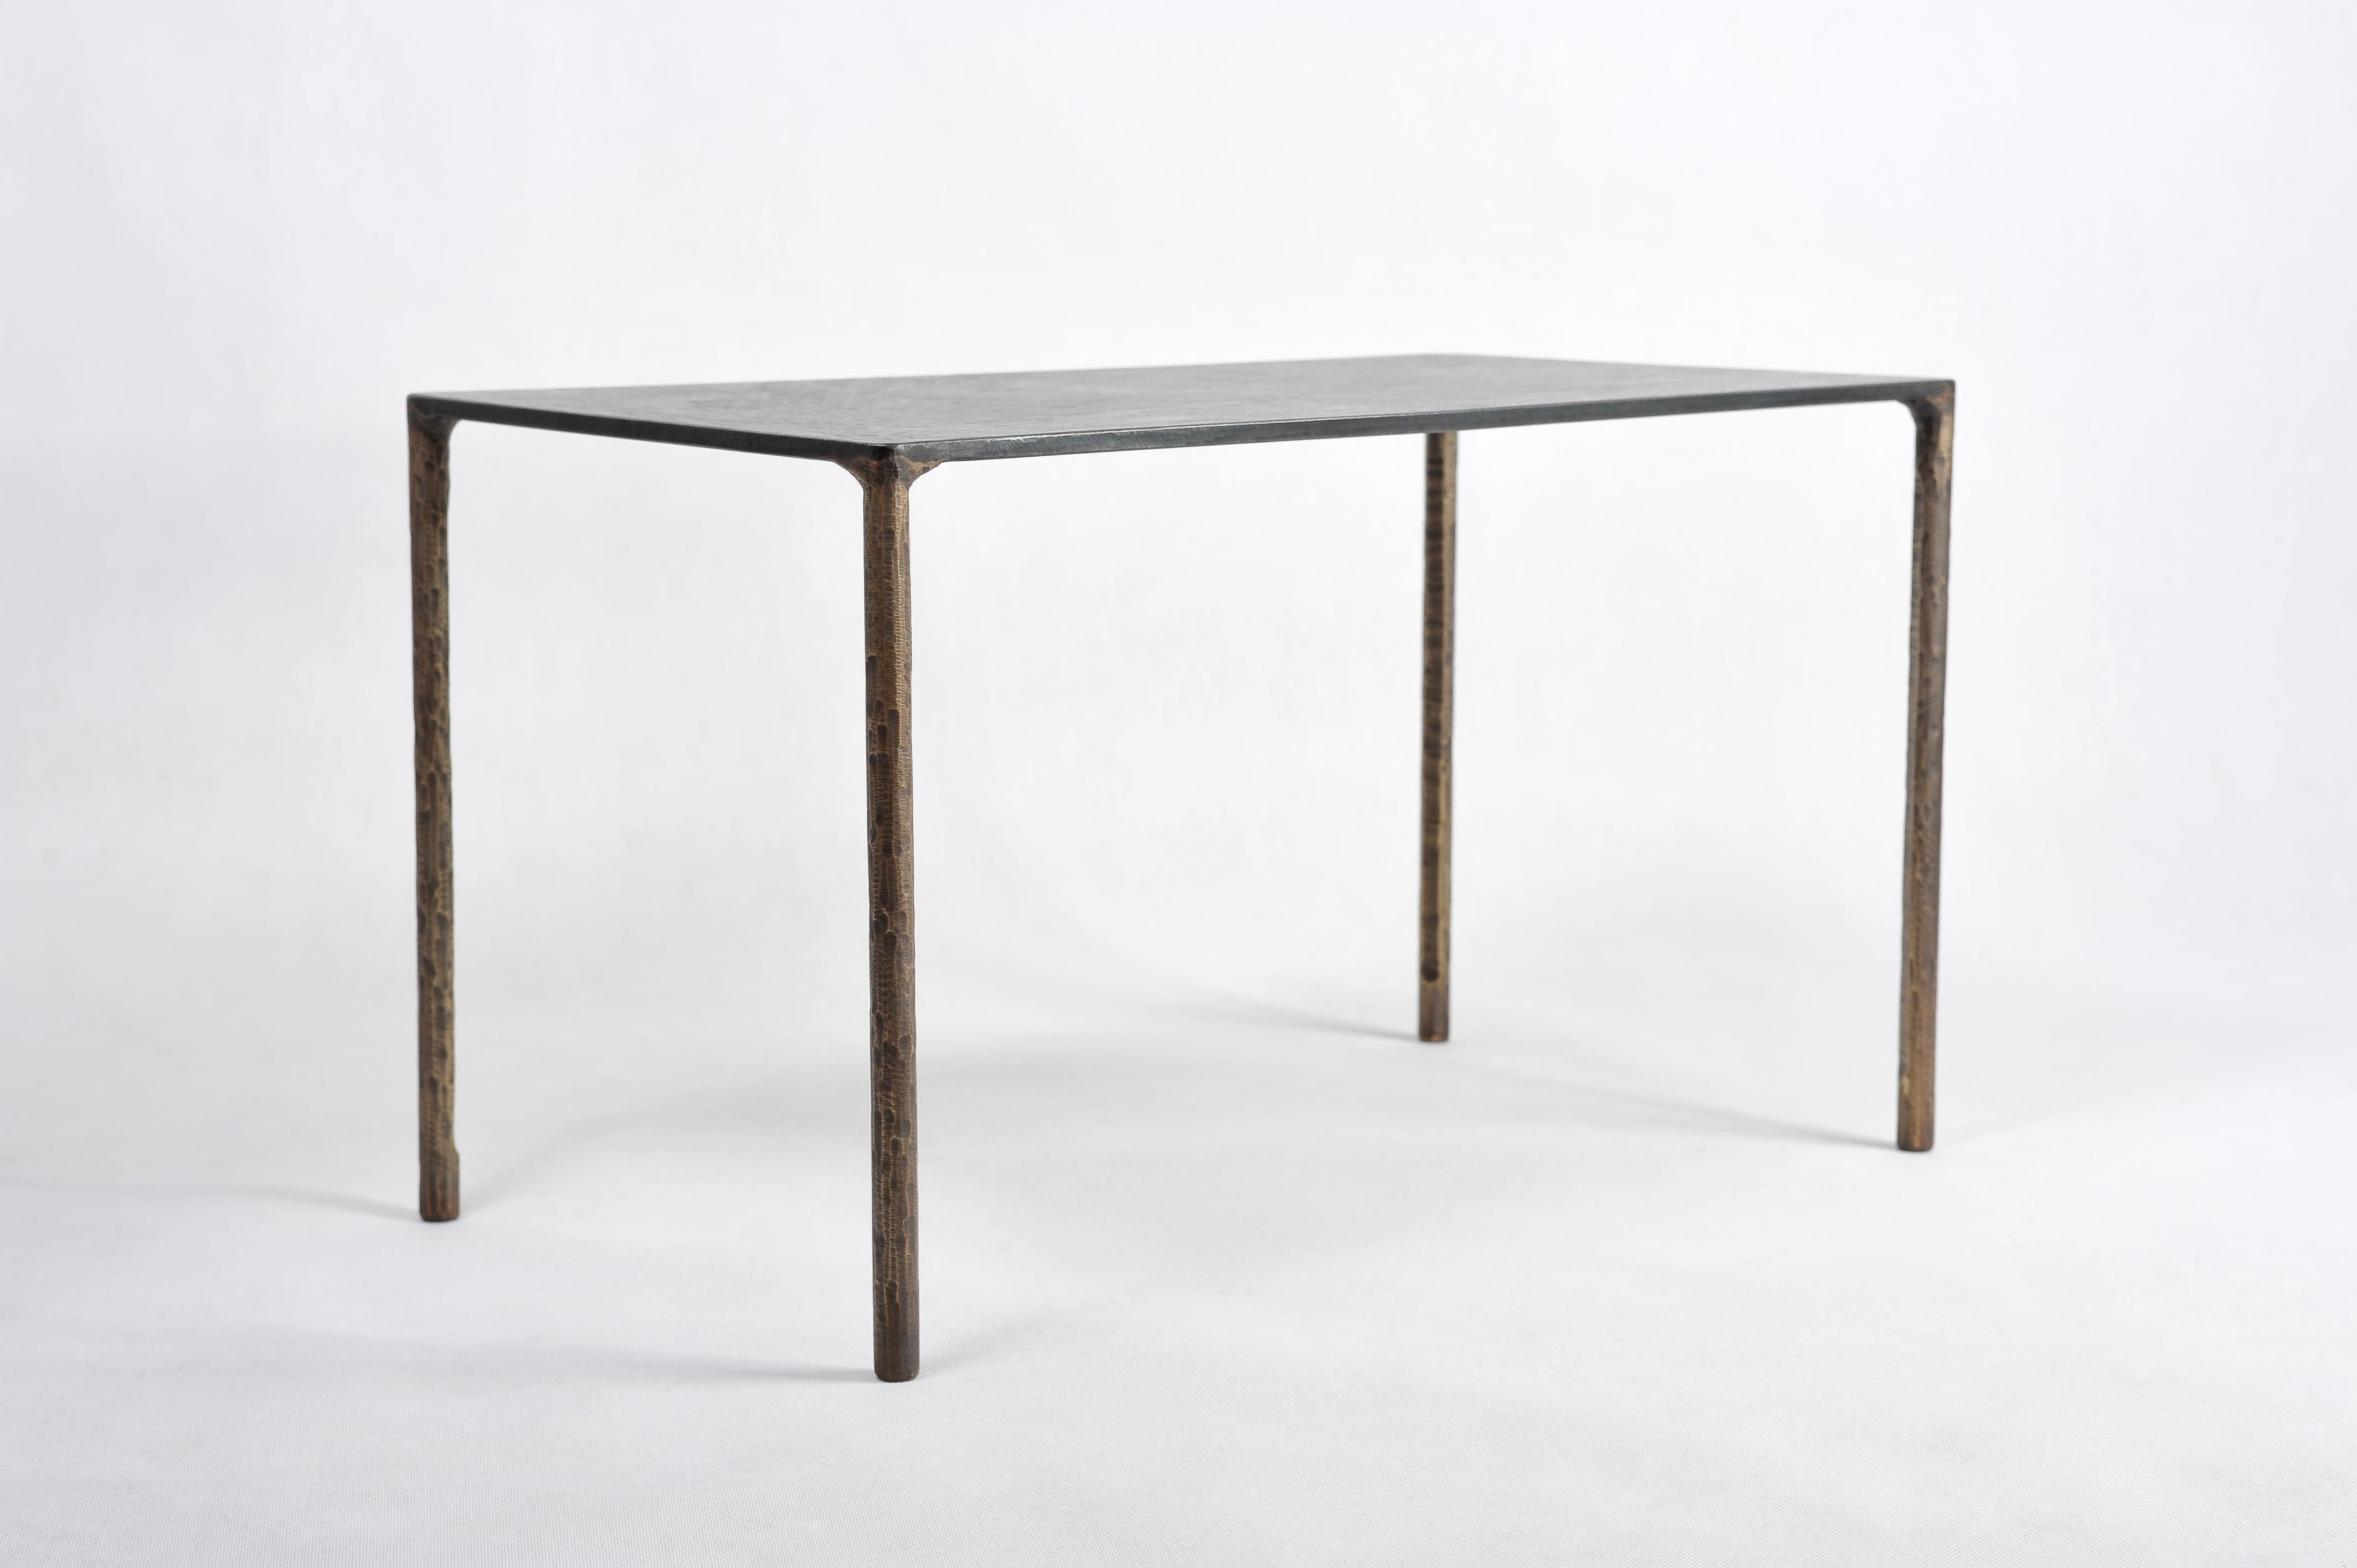 Brass side table signed by Lukasz Friedrich.
Textured side or coffee table.
Materials: Legs, patinated brass; top, patinated and waxed steel.
Dimensions: D 38 cm, L 68 cm, H 40 cm.
Signed and dated.

Lukasz Friedrich (born 1980), lives and